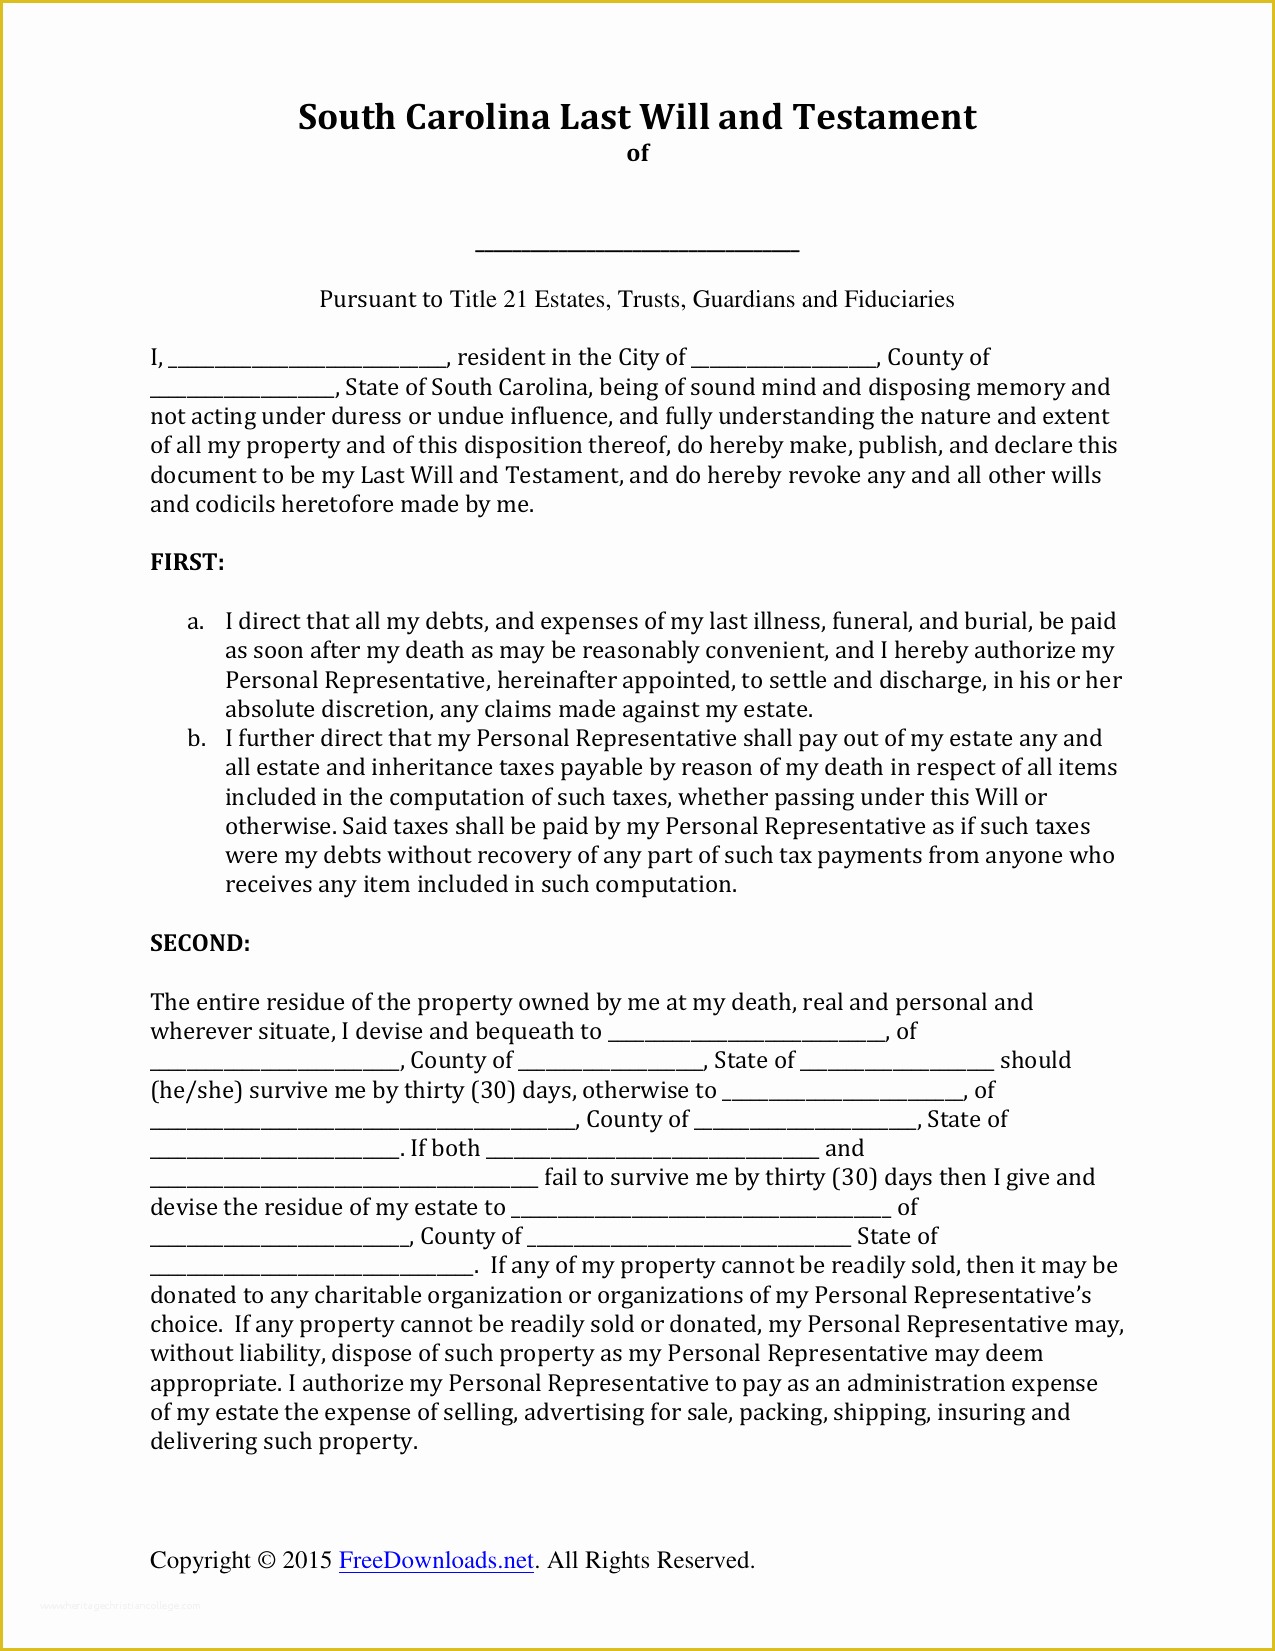 Last Will and Testament Free Template Tennessee Of Download south Carolina Last Will and Testament form